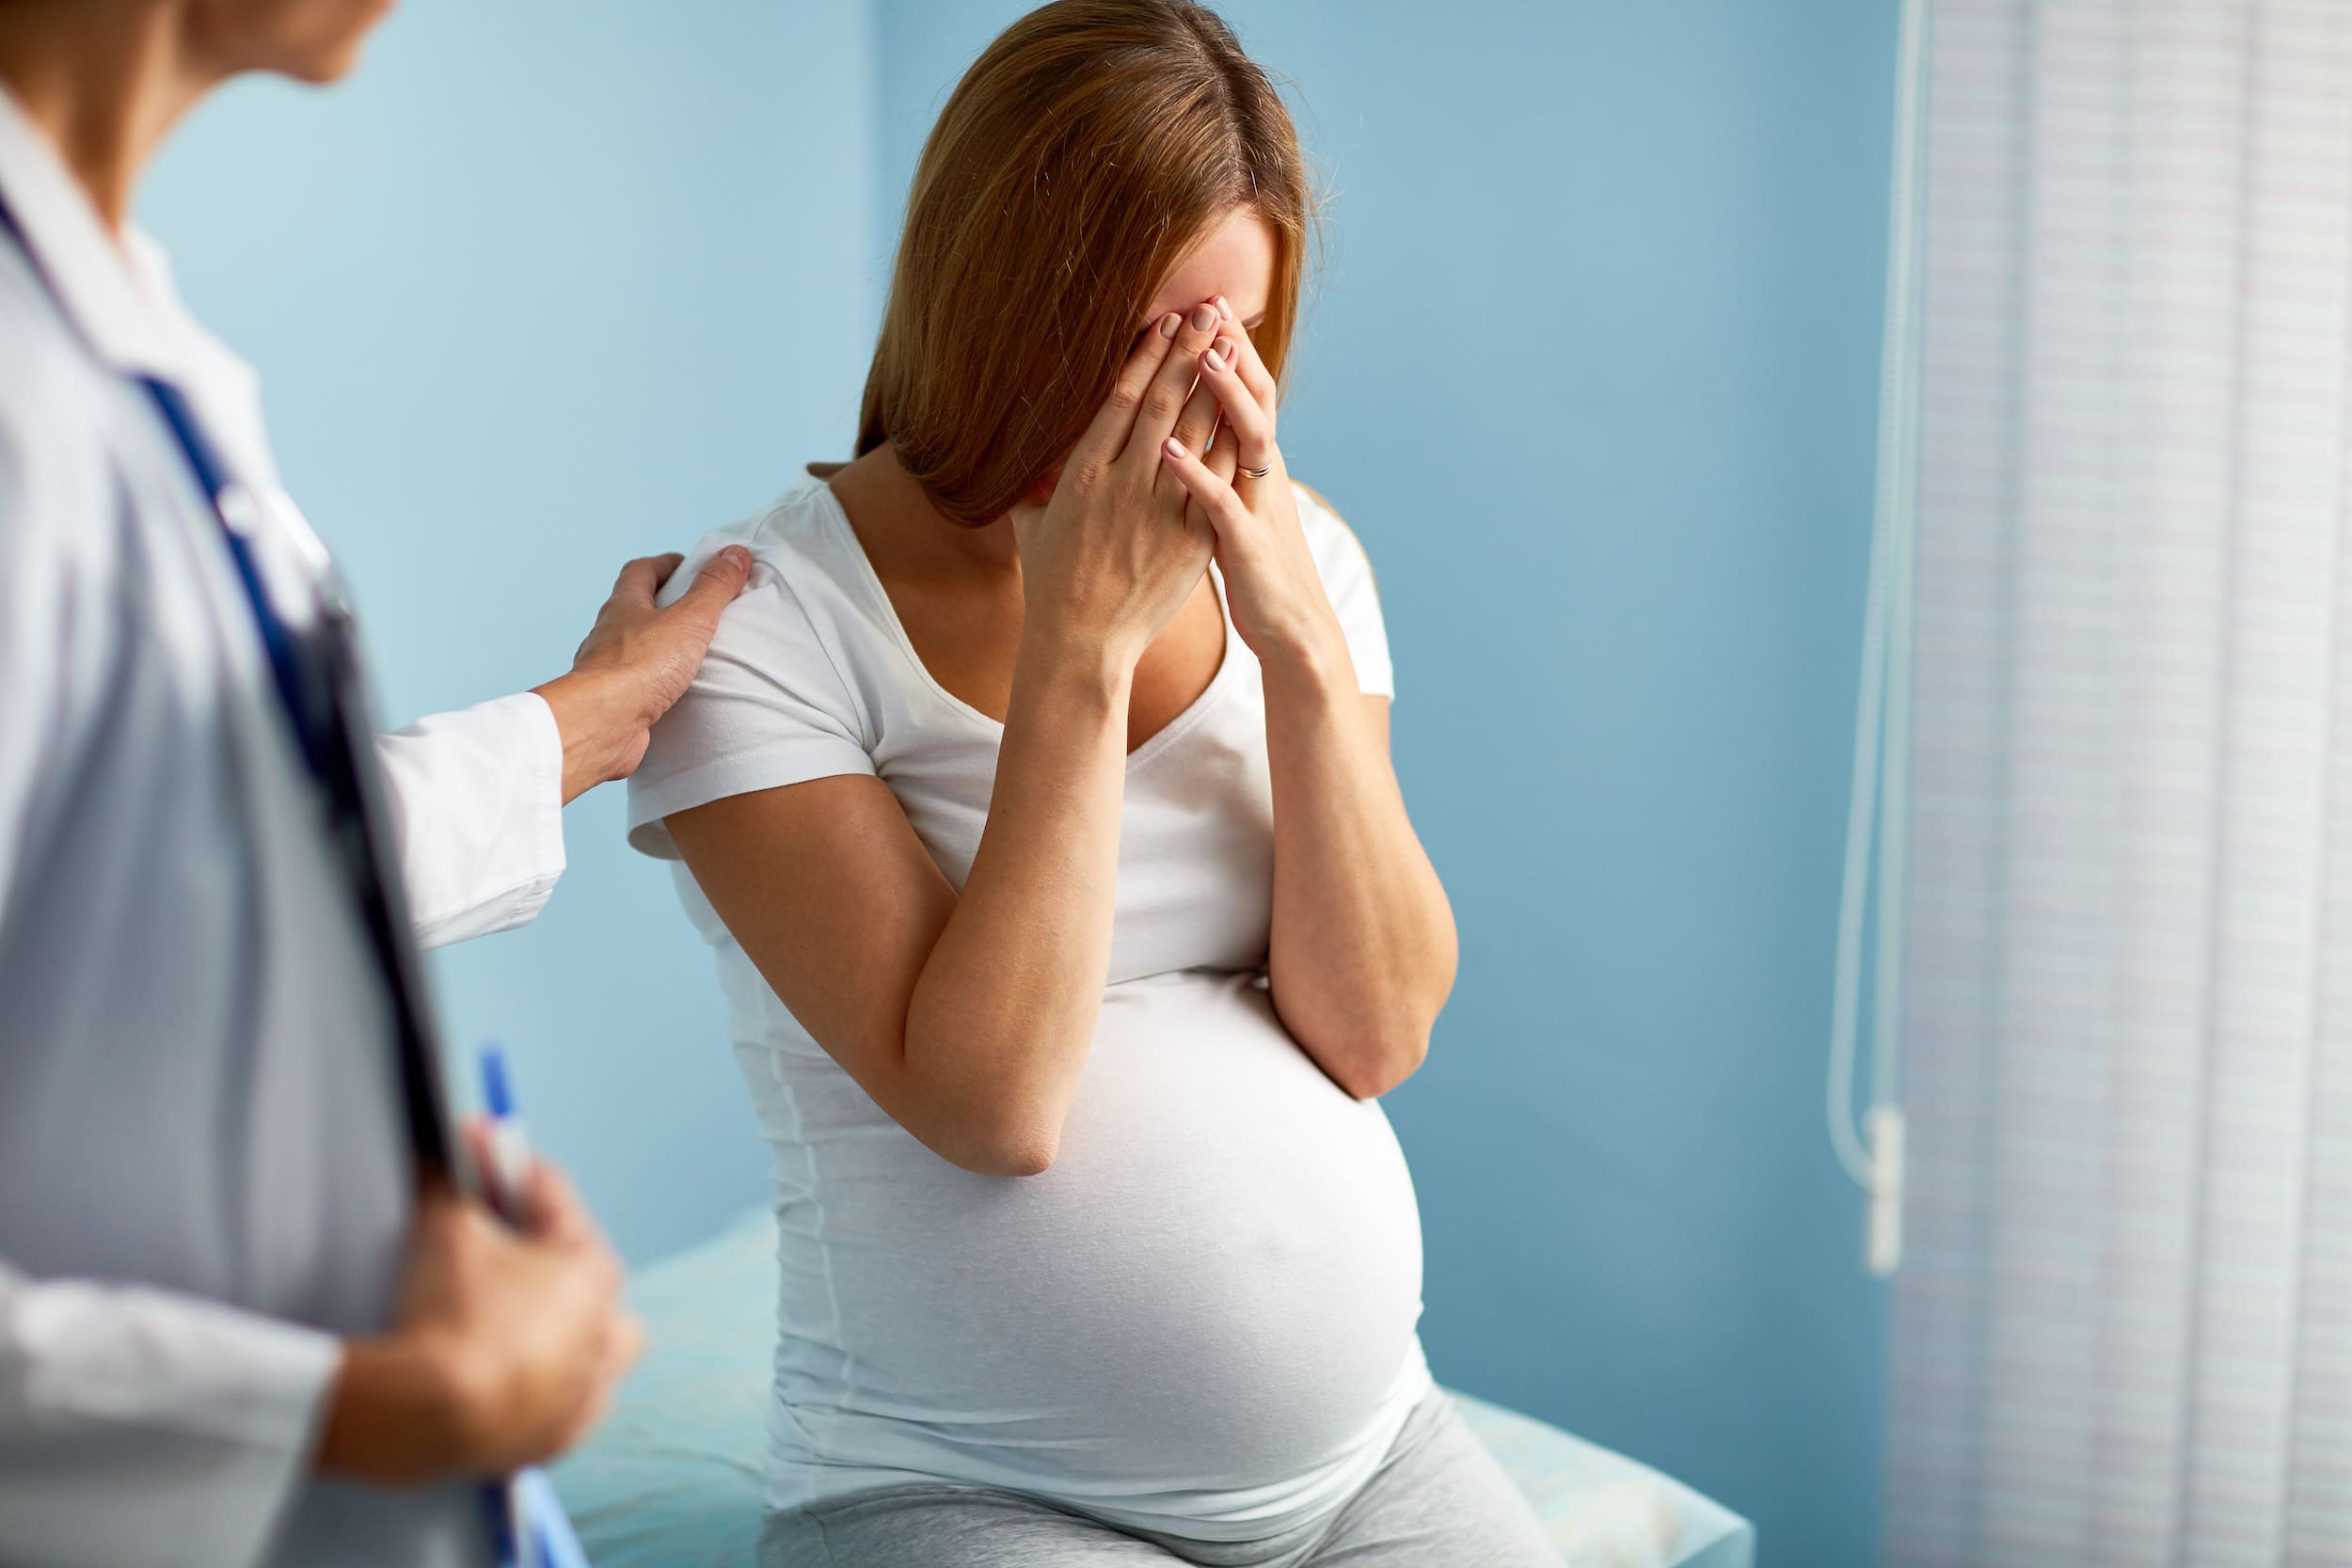 Treatments for depression during pregnancy